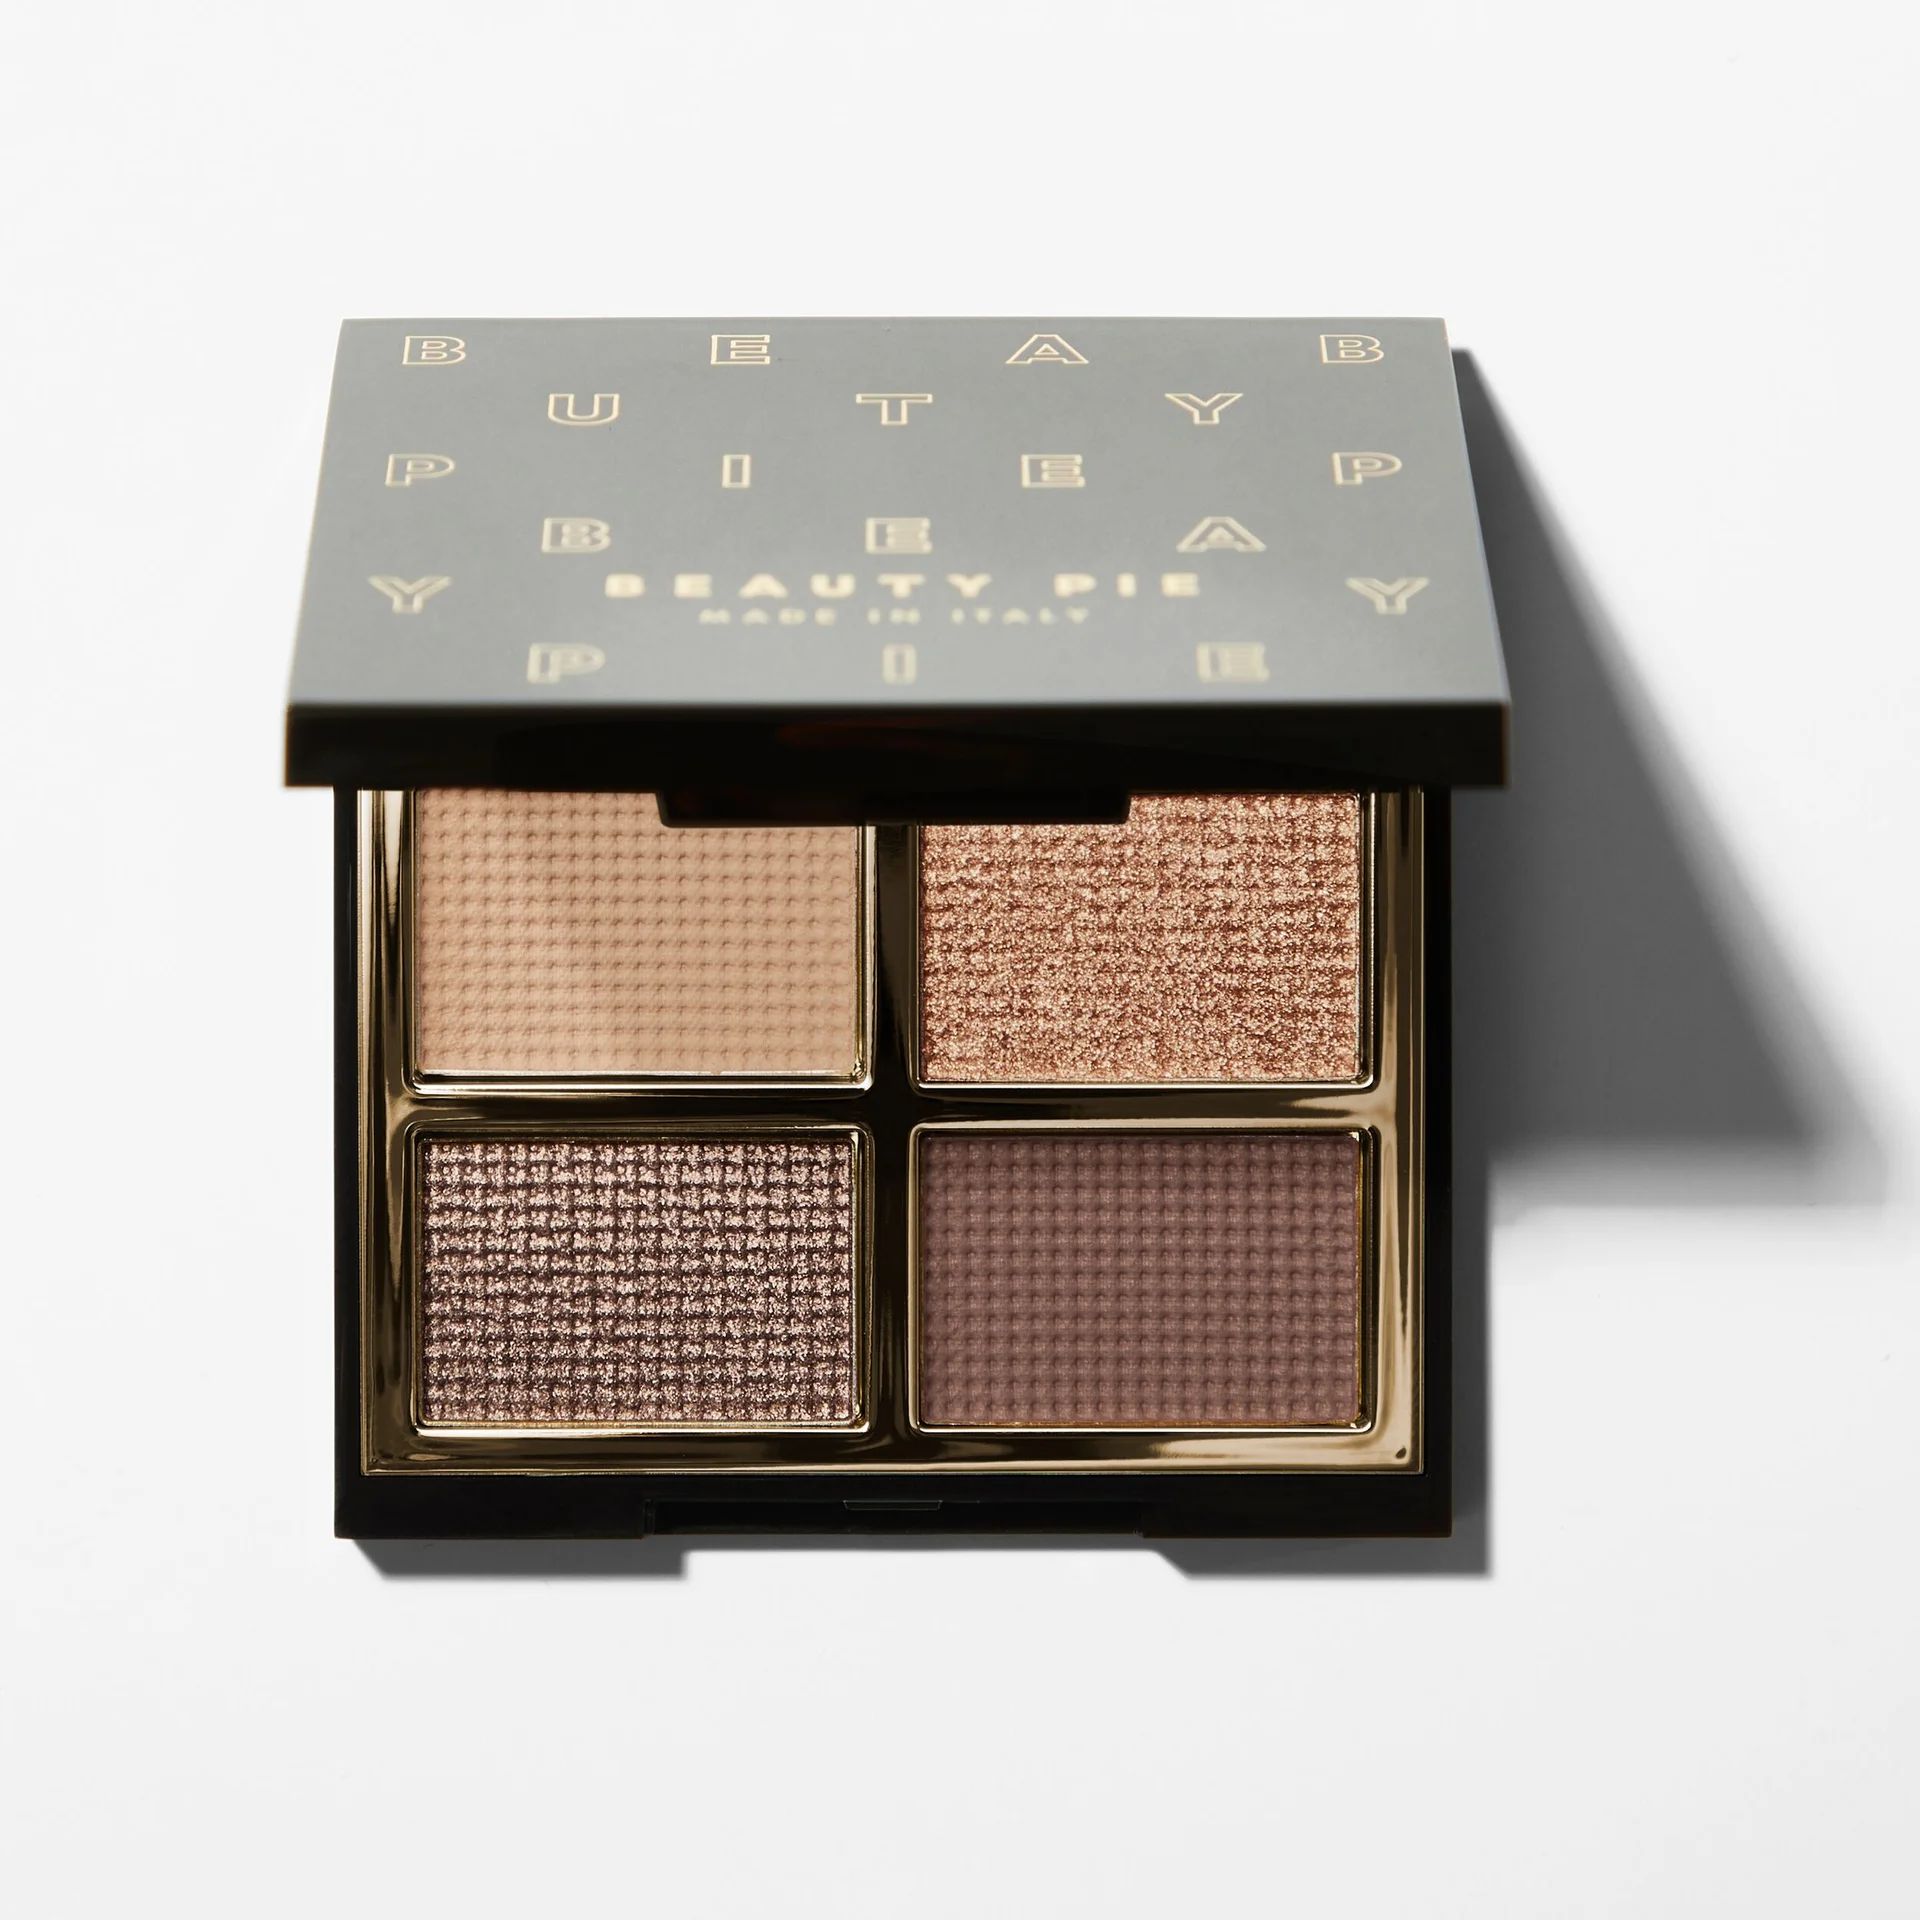 Beauty Pie X Pati Dubroff
 Deluxe Eyeshadow Quad (Four Perfect Browns) | Beauty Pie (UK)